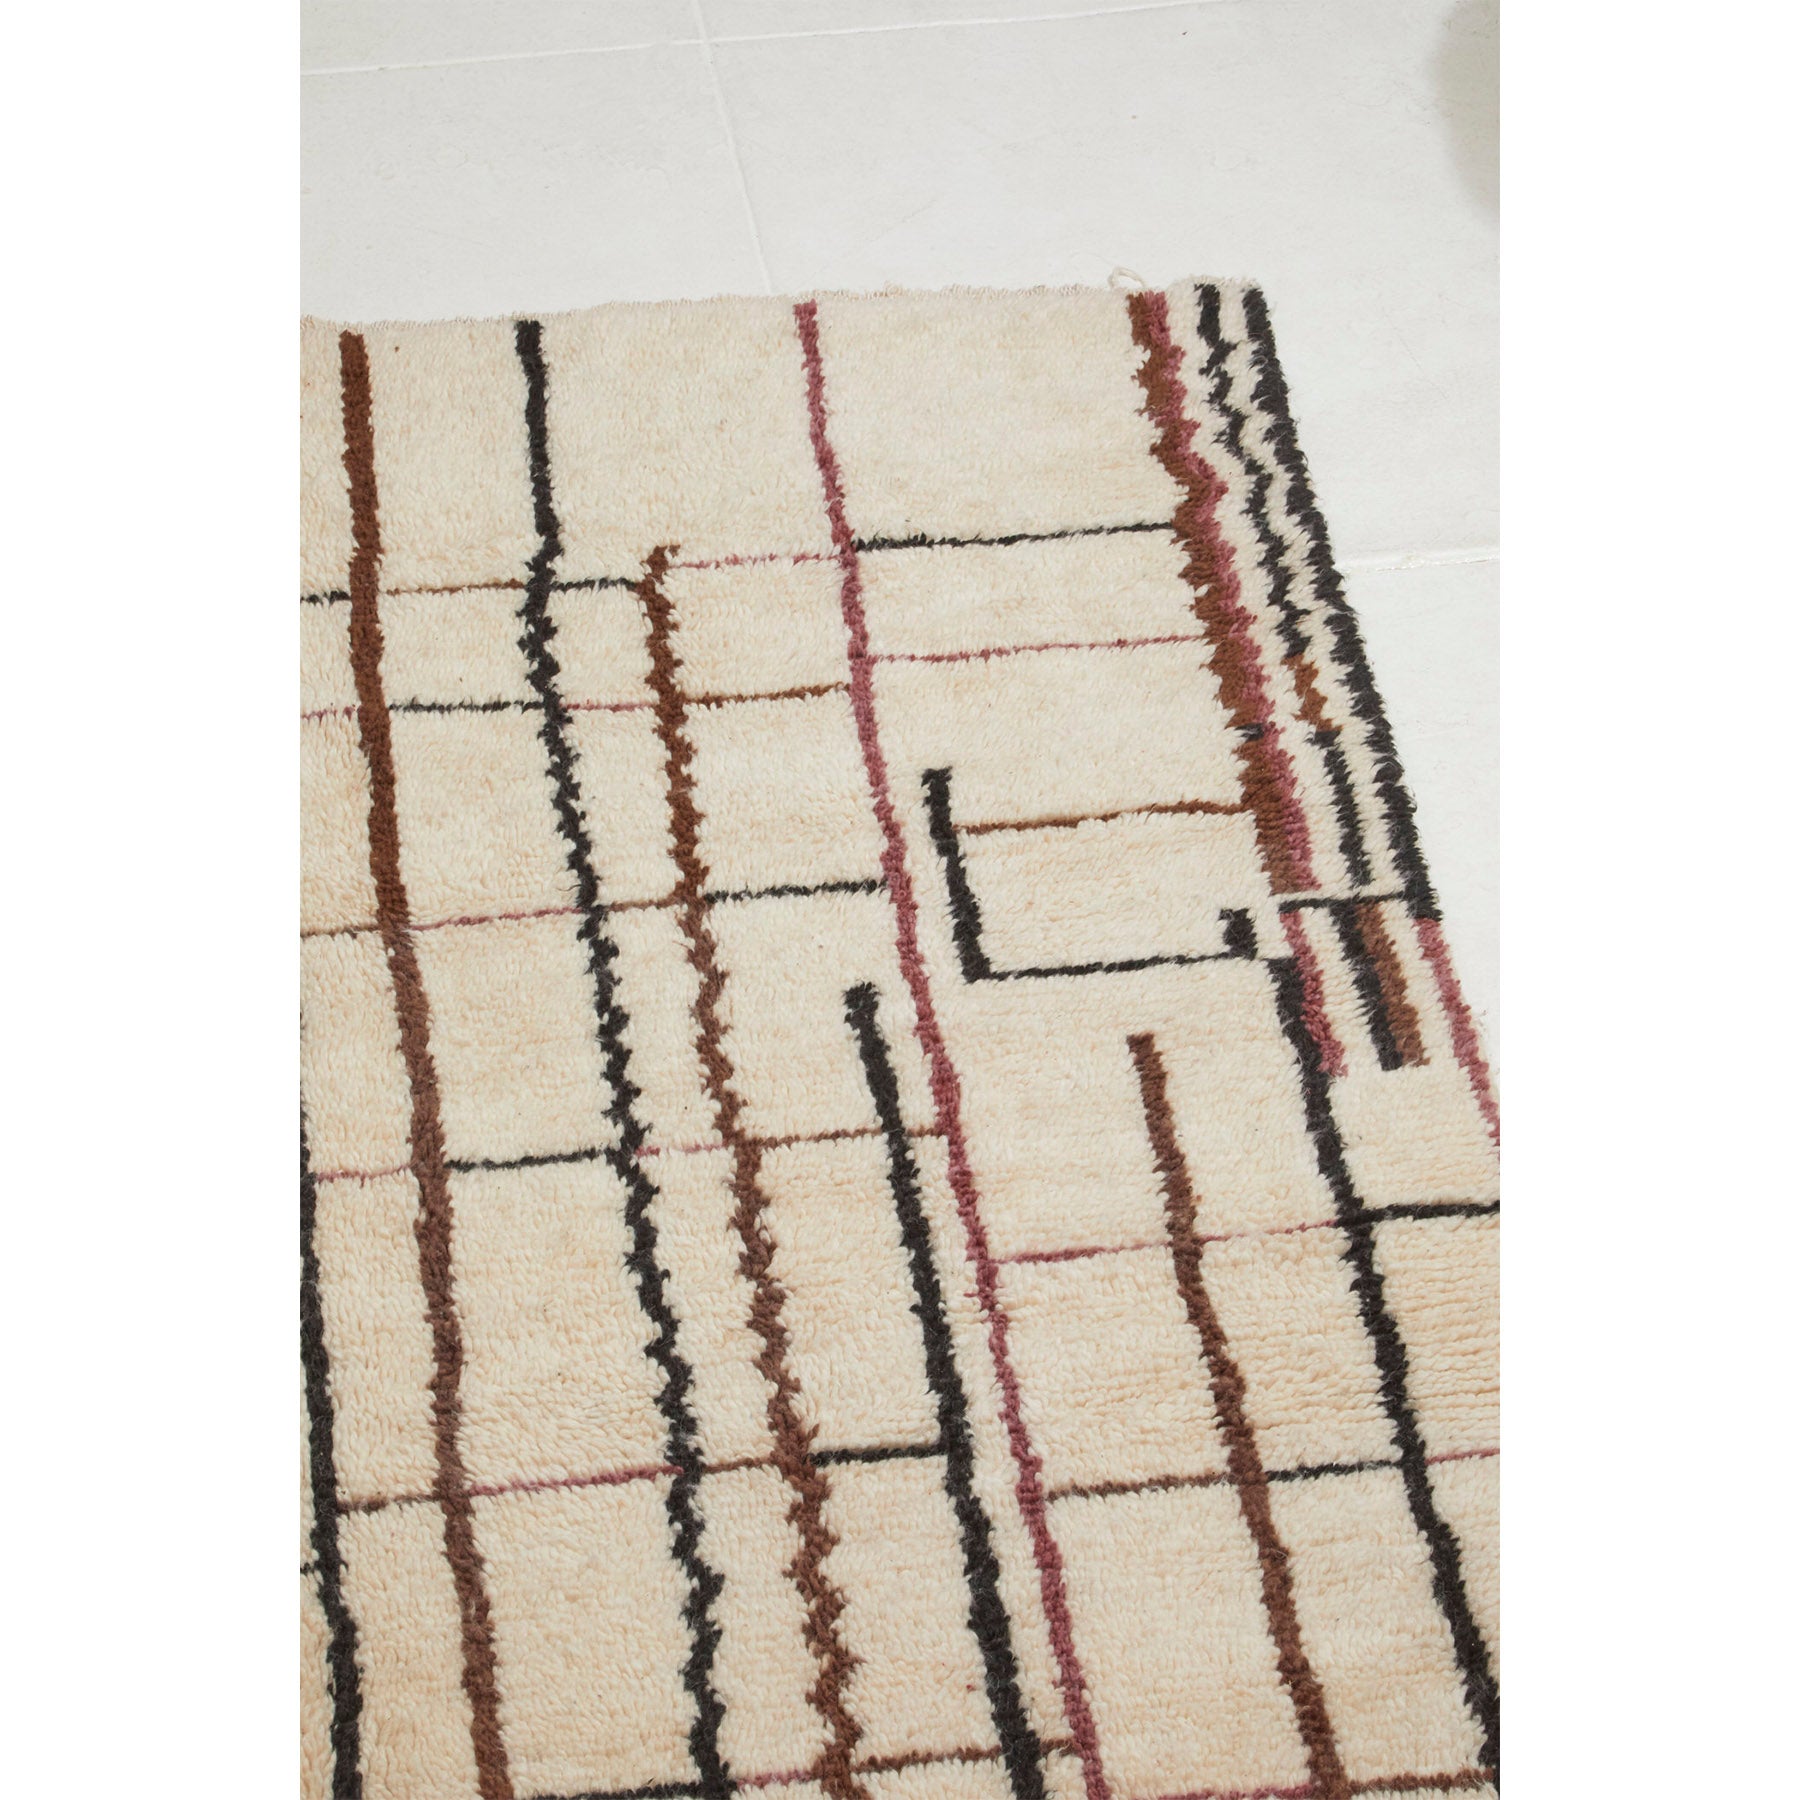 White, brown, and black Moroccan Azilal style area rug - Kantara | Moroccan Rugs